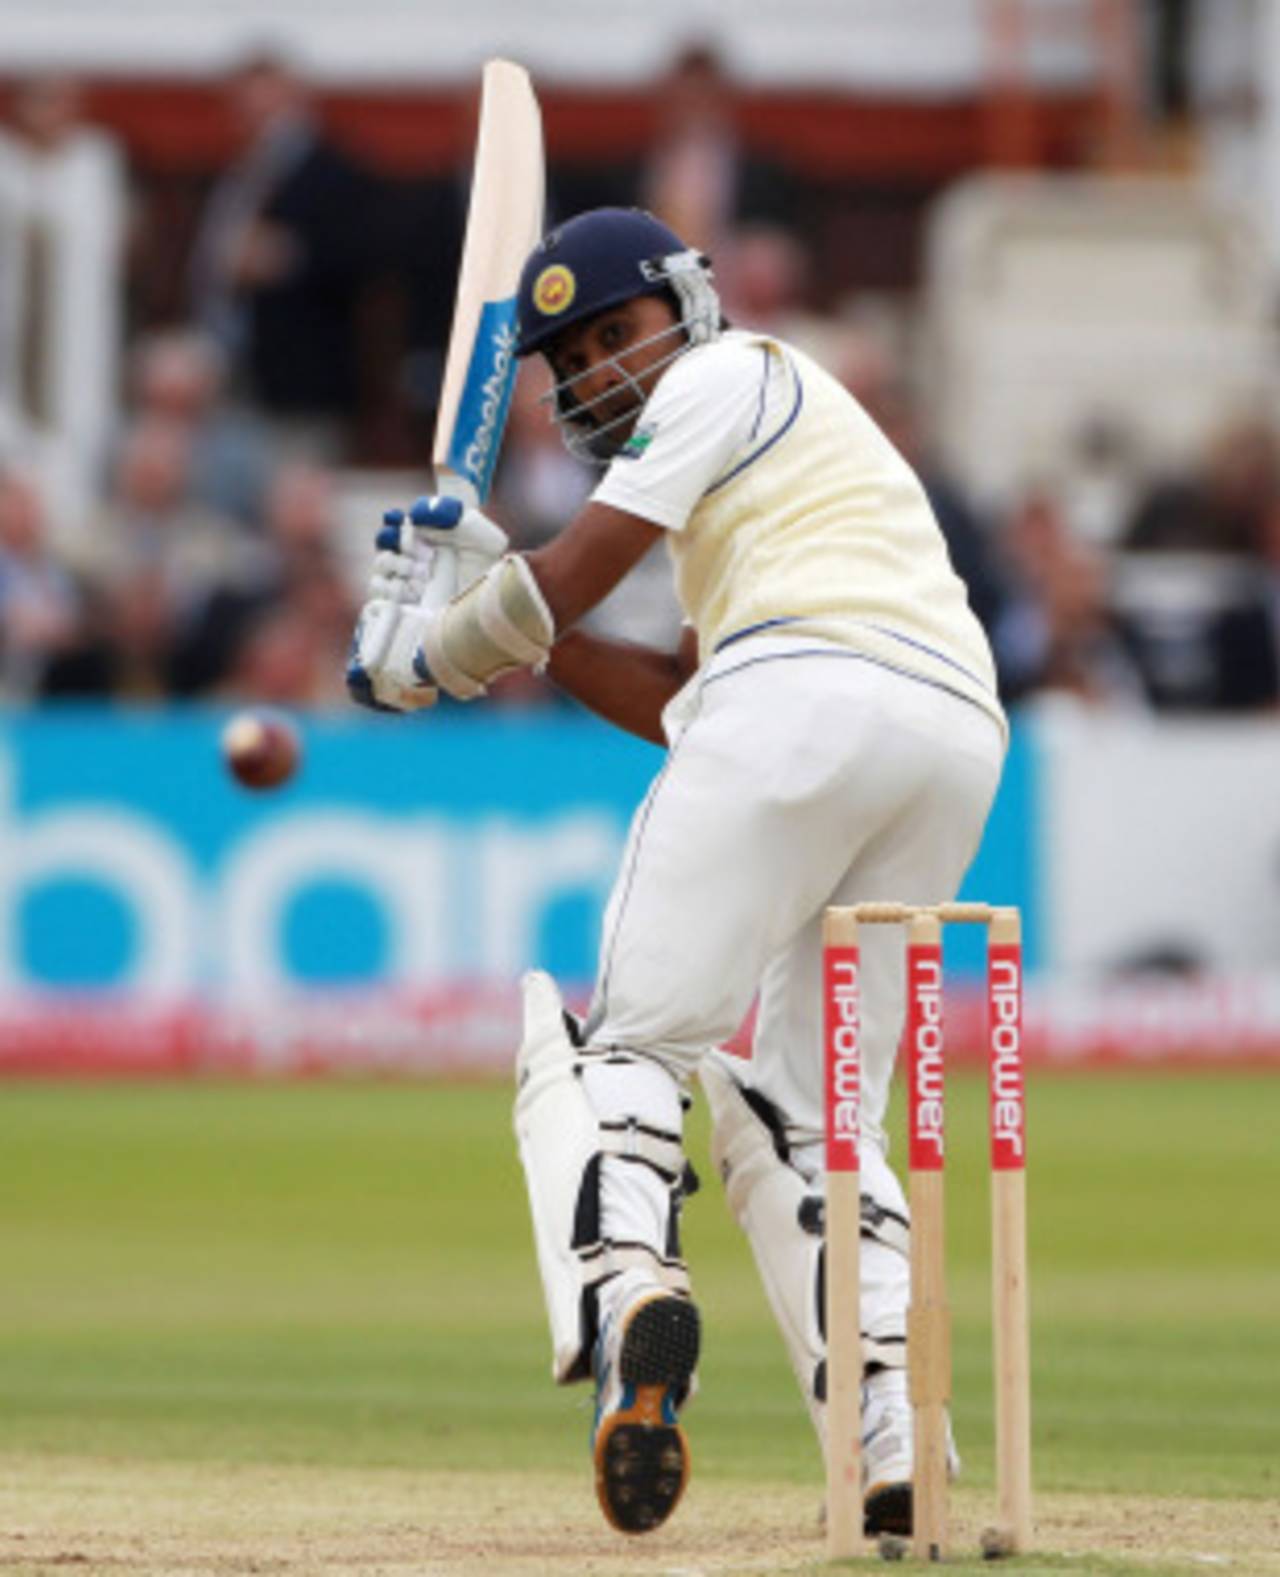 Mahela Jayawardene made the most of the leg-side freebies offered by England, England v Sri Lanka, 2nd Test, Lord's, June 5, 2011